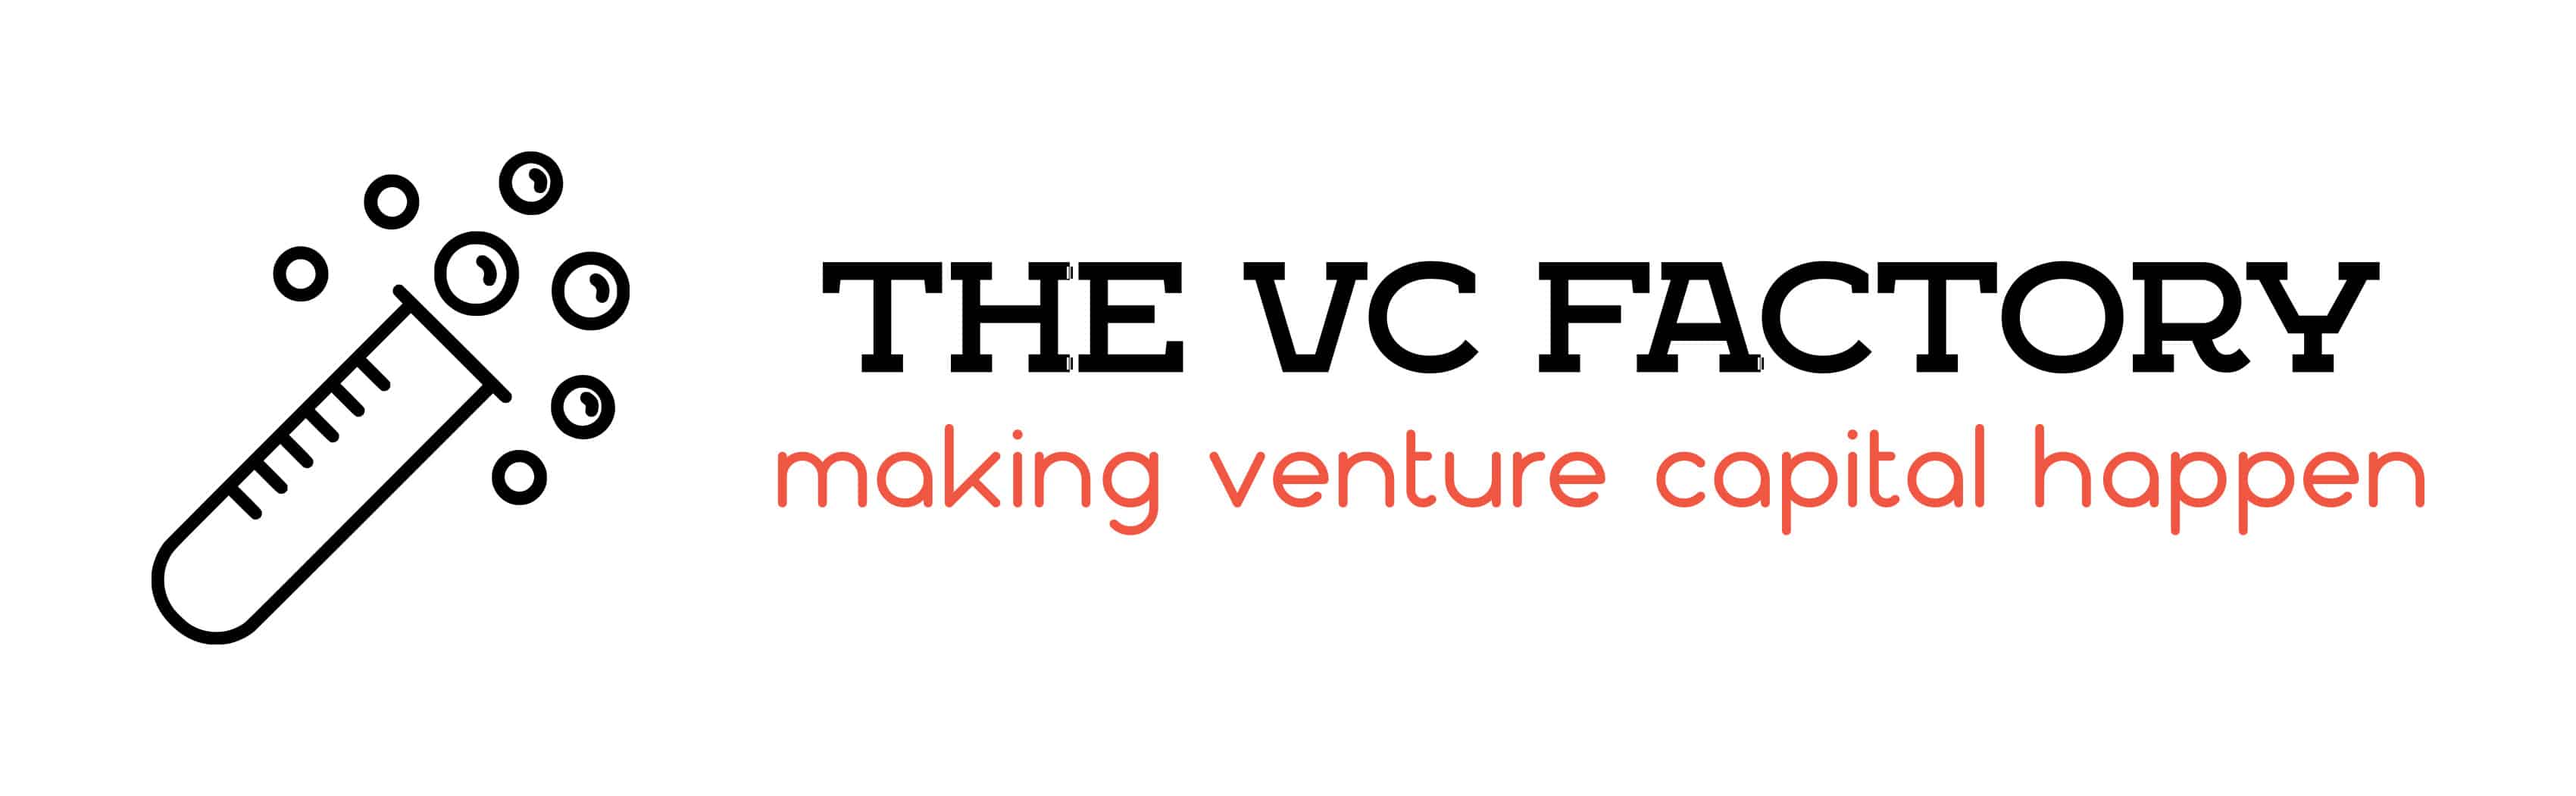 The VC Factory logo